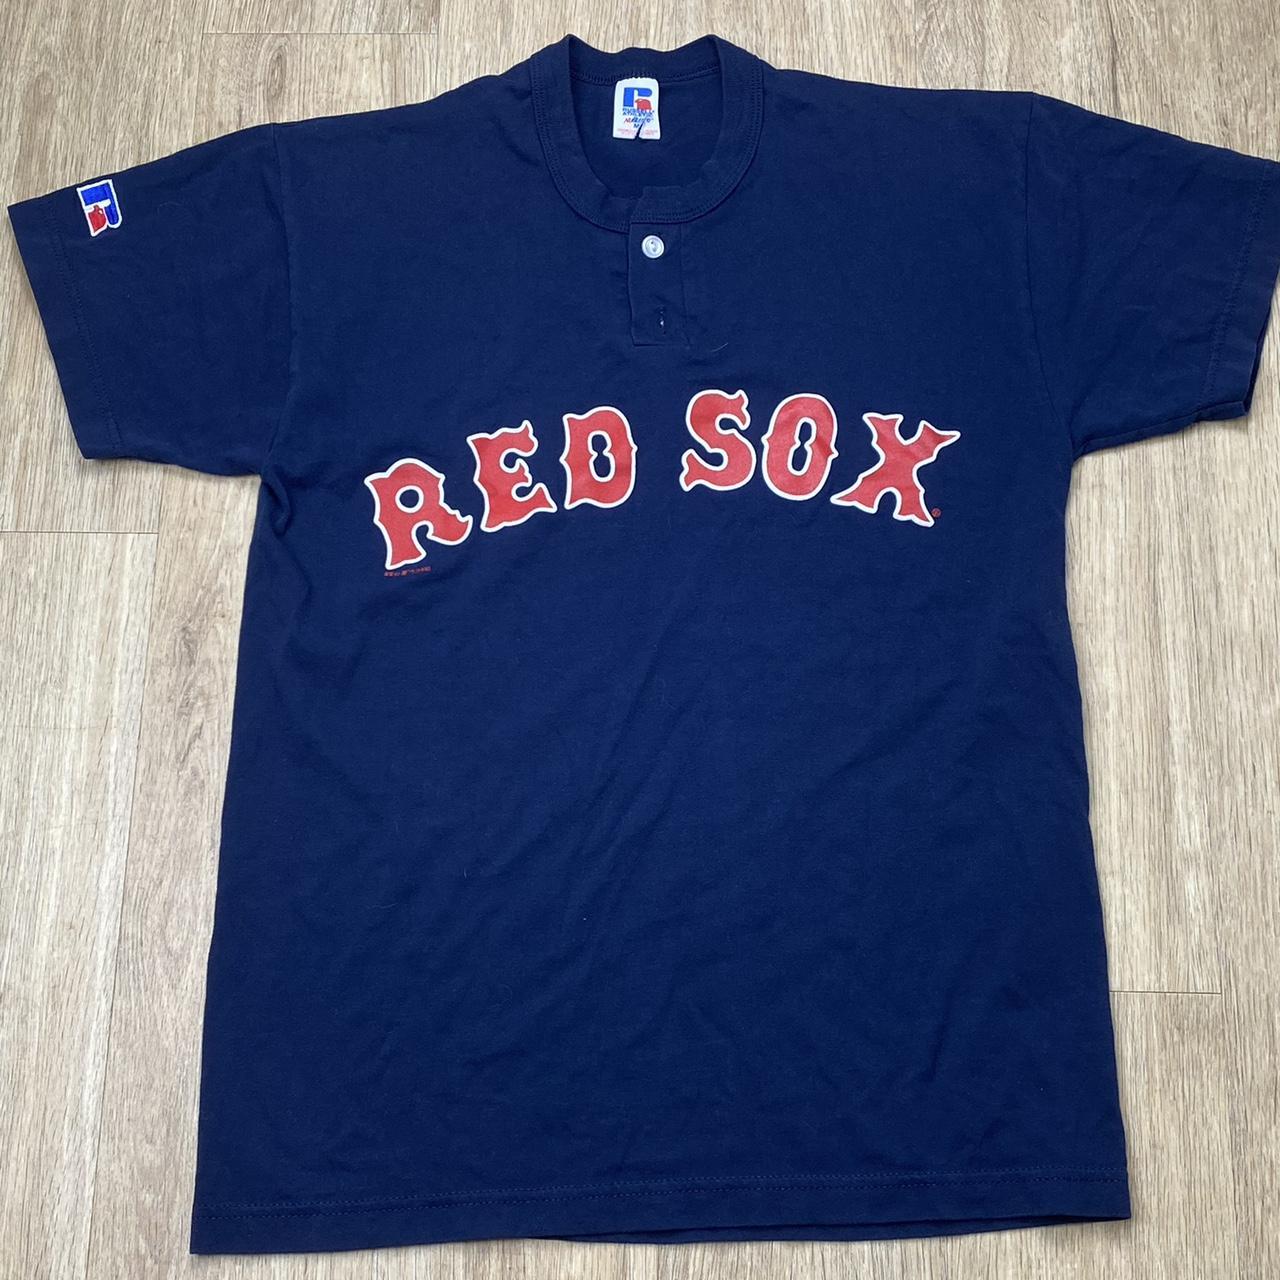 Vintage BOSTON RED SOX MLB Russell Athletic Jersey M